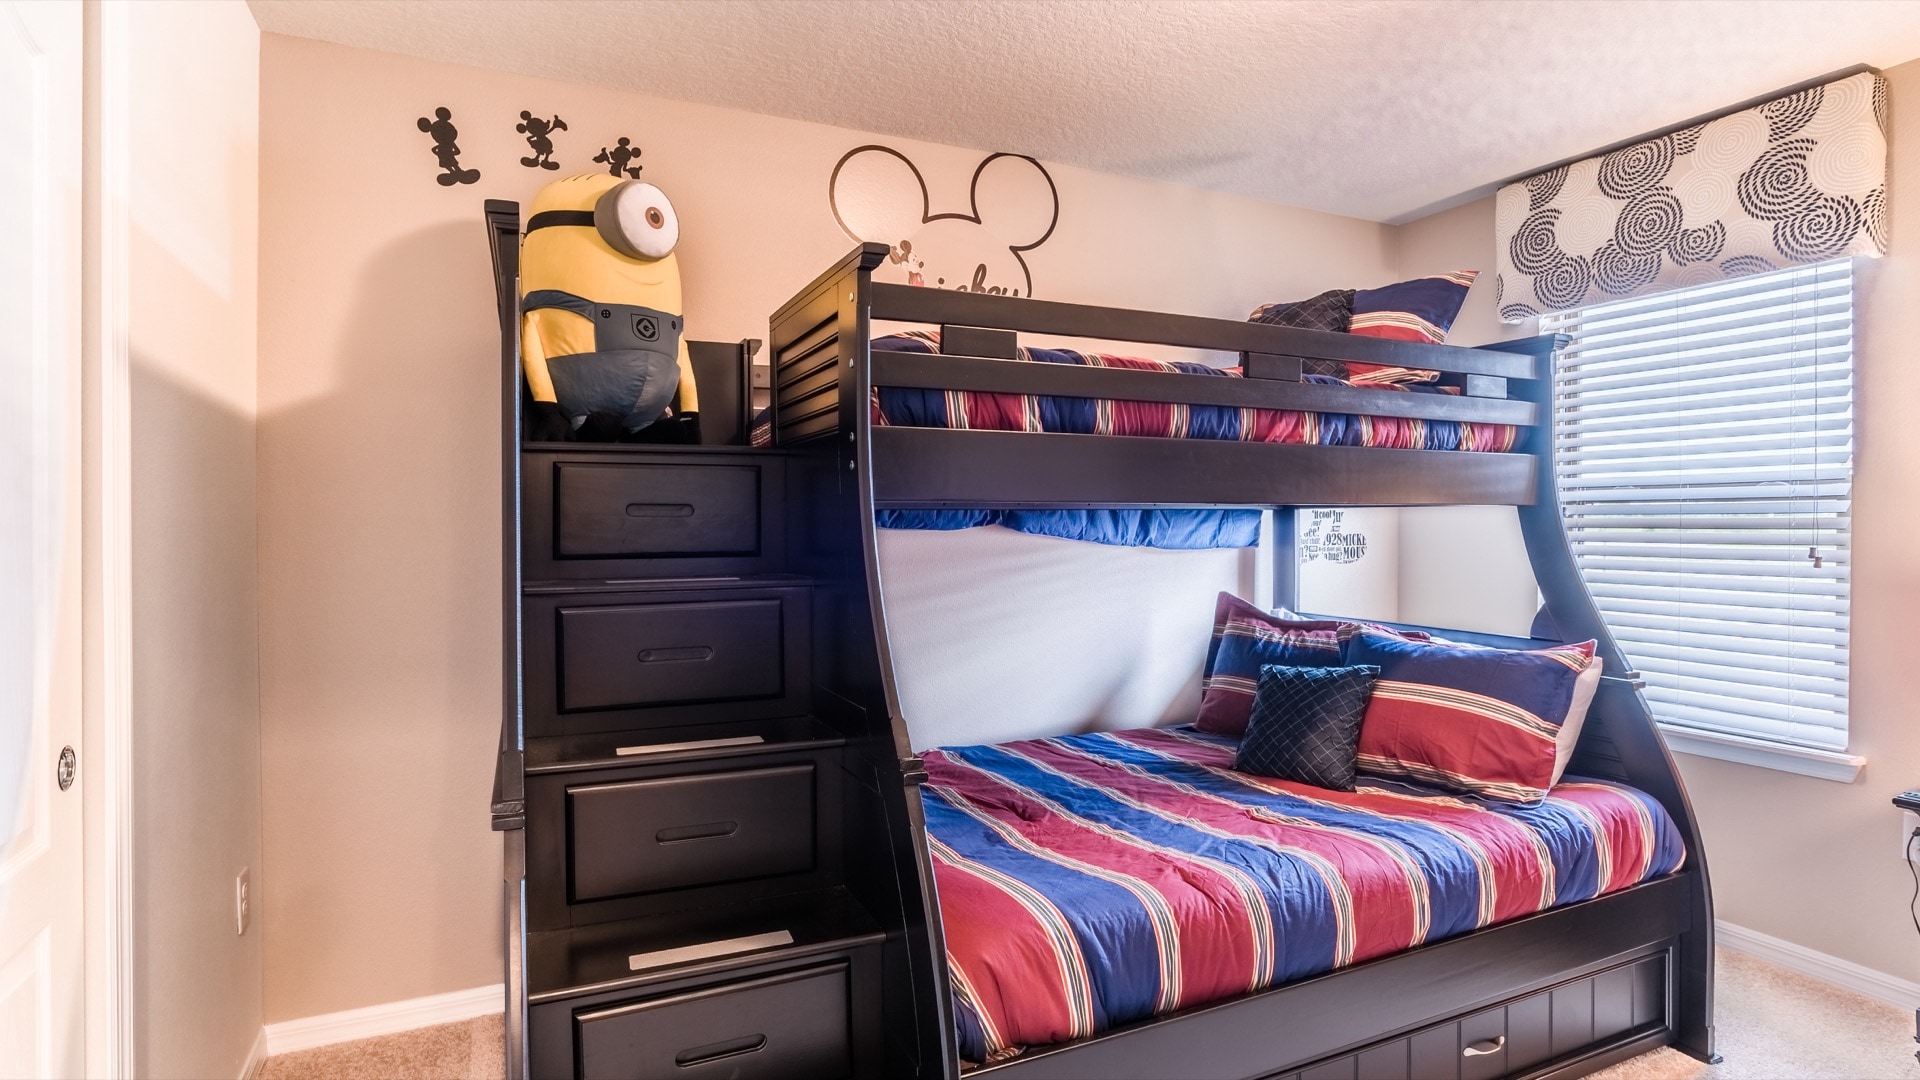 Twin/Double Bunk + Twin Trundle Bedroom 7 Upstairs
Mickey Theme